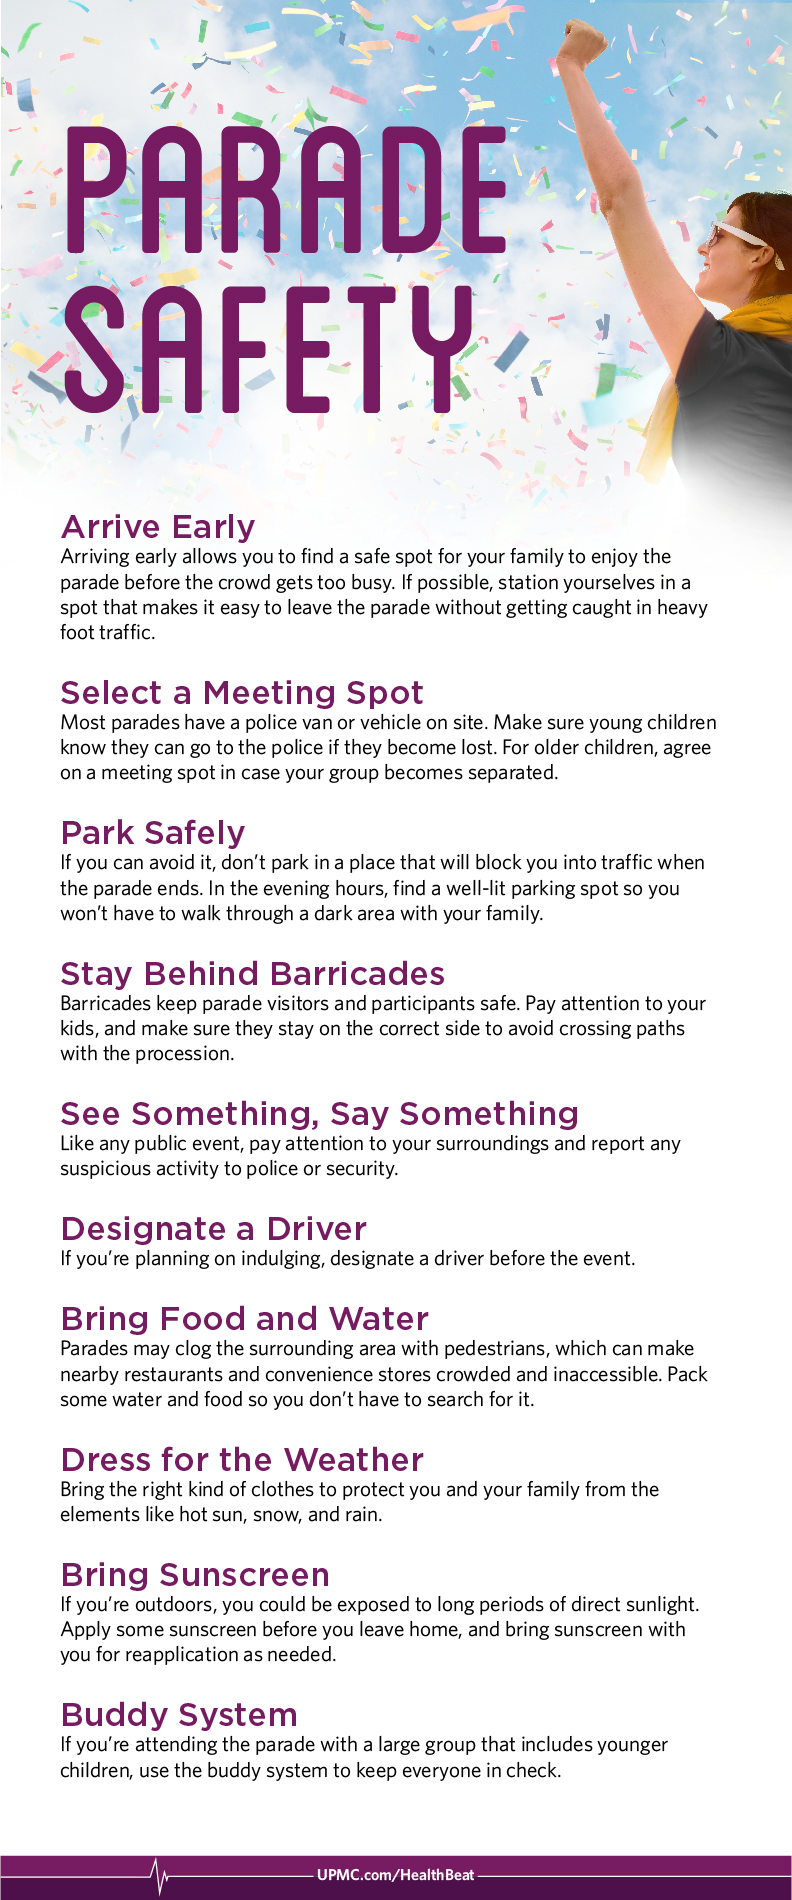 Learn more about parade safety